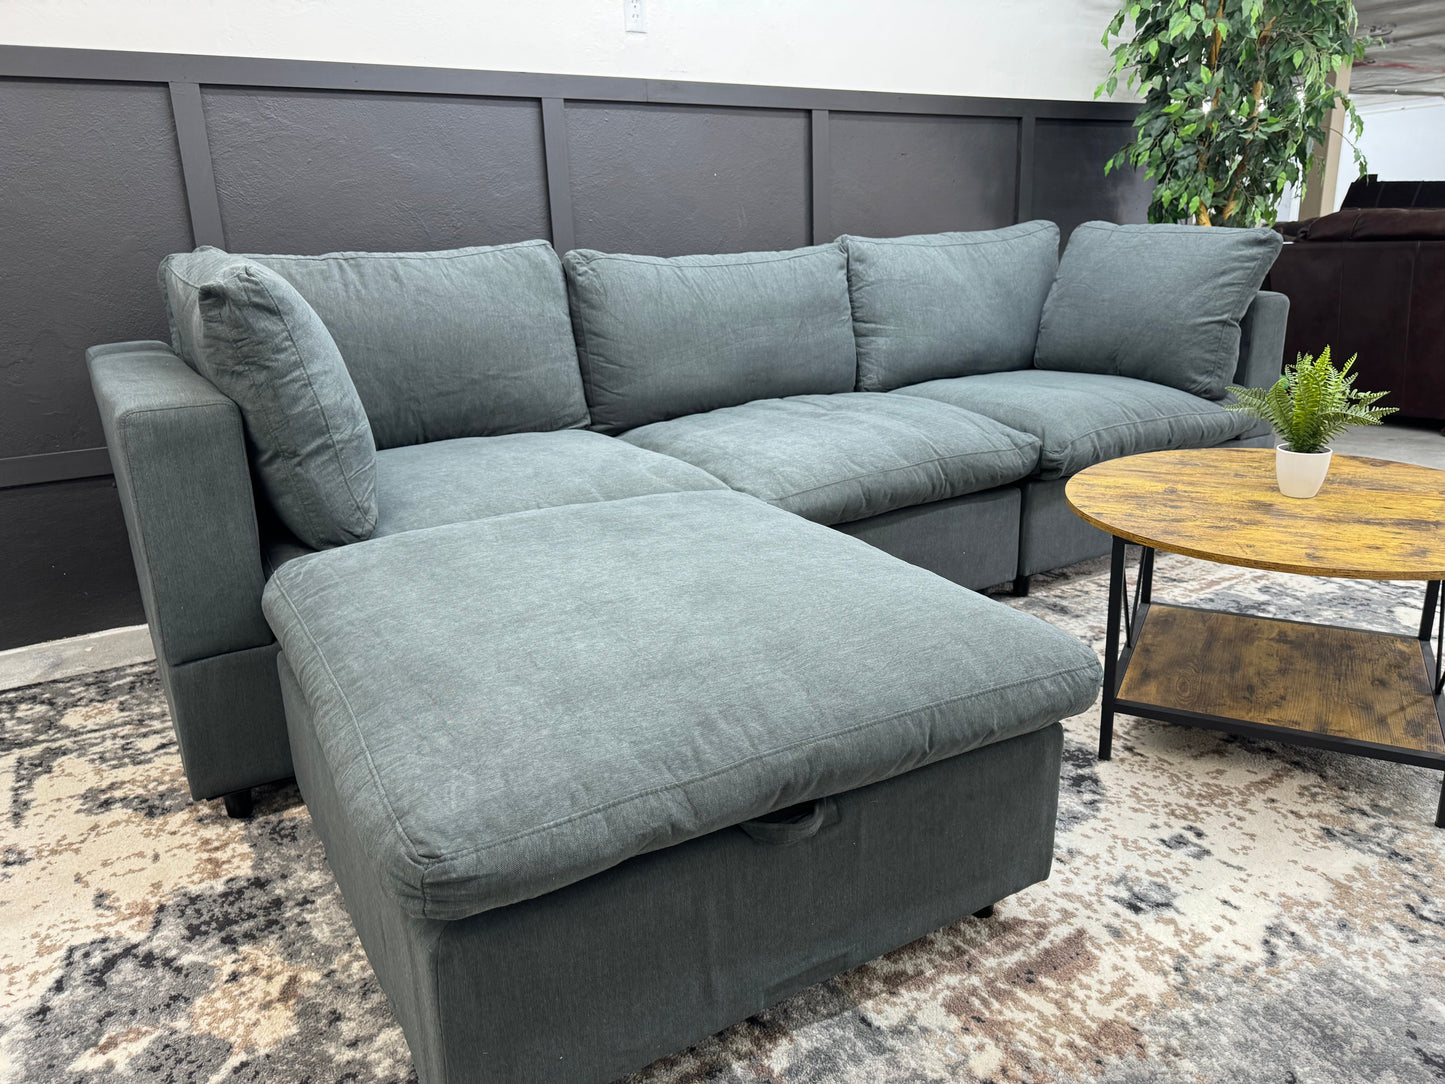 BRAND NEW Dark Gray Modular Sectional Cloud Couch